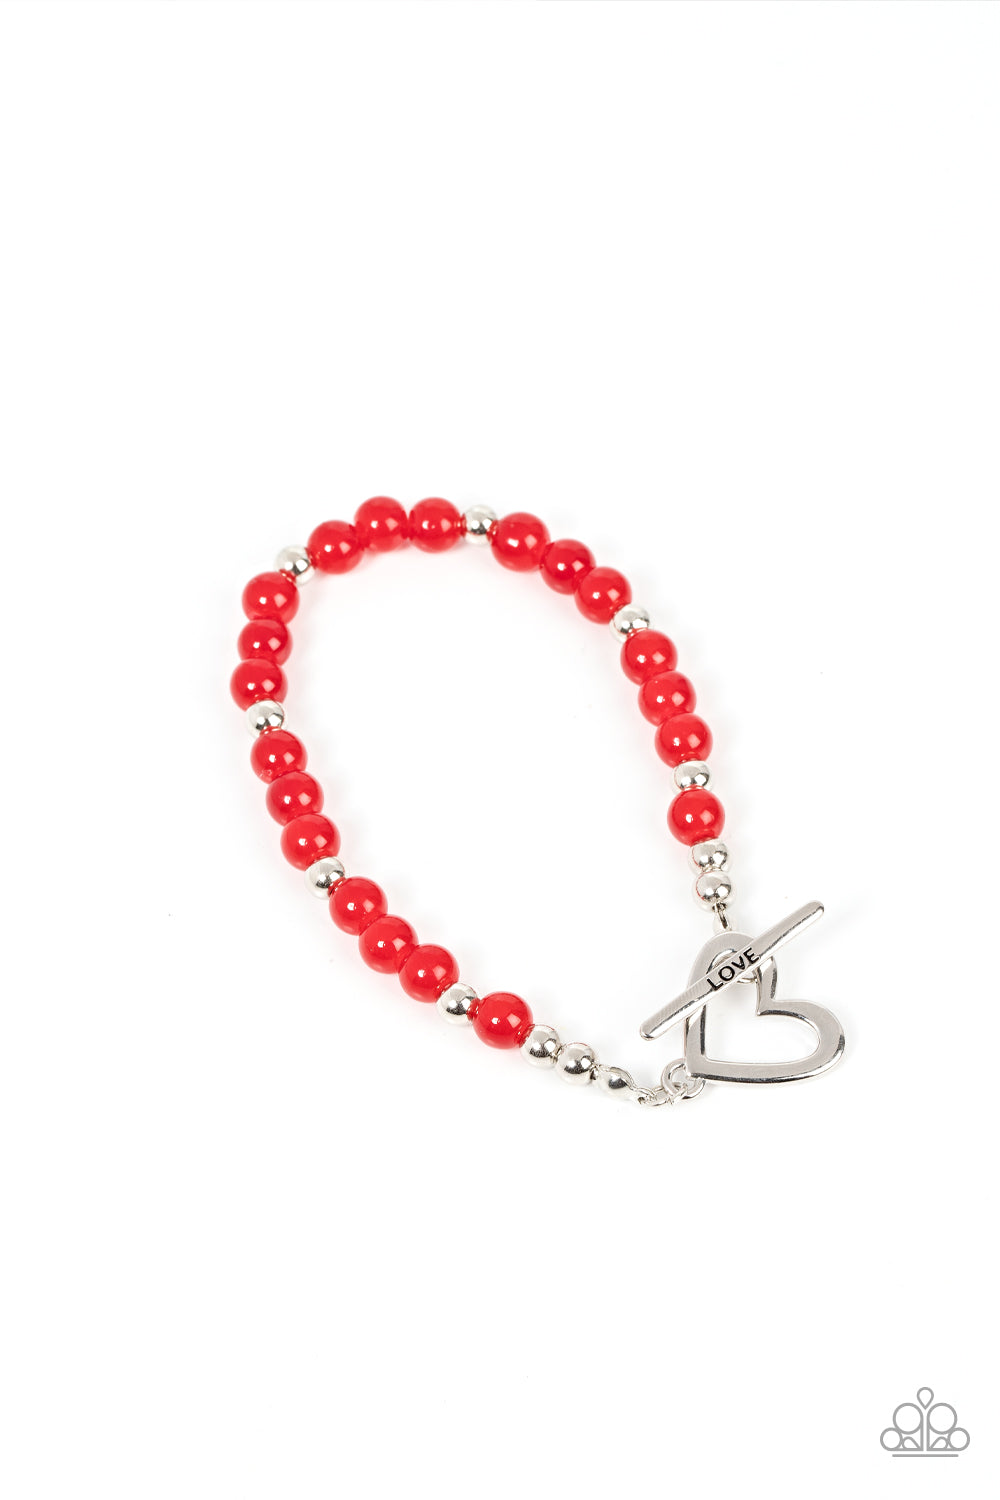 Following My Heart - Red Bead - Silver Bracelet - Paparazzi Accessories - Shiny silver heart frame interlocks with a toggle closure at the center of a shiny silver and glassy red beaded bracelet. The silver toggle is stamped in the word, "love," for a romantic finish. Features a toggle closure.